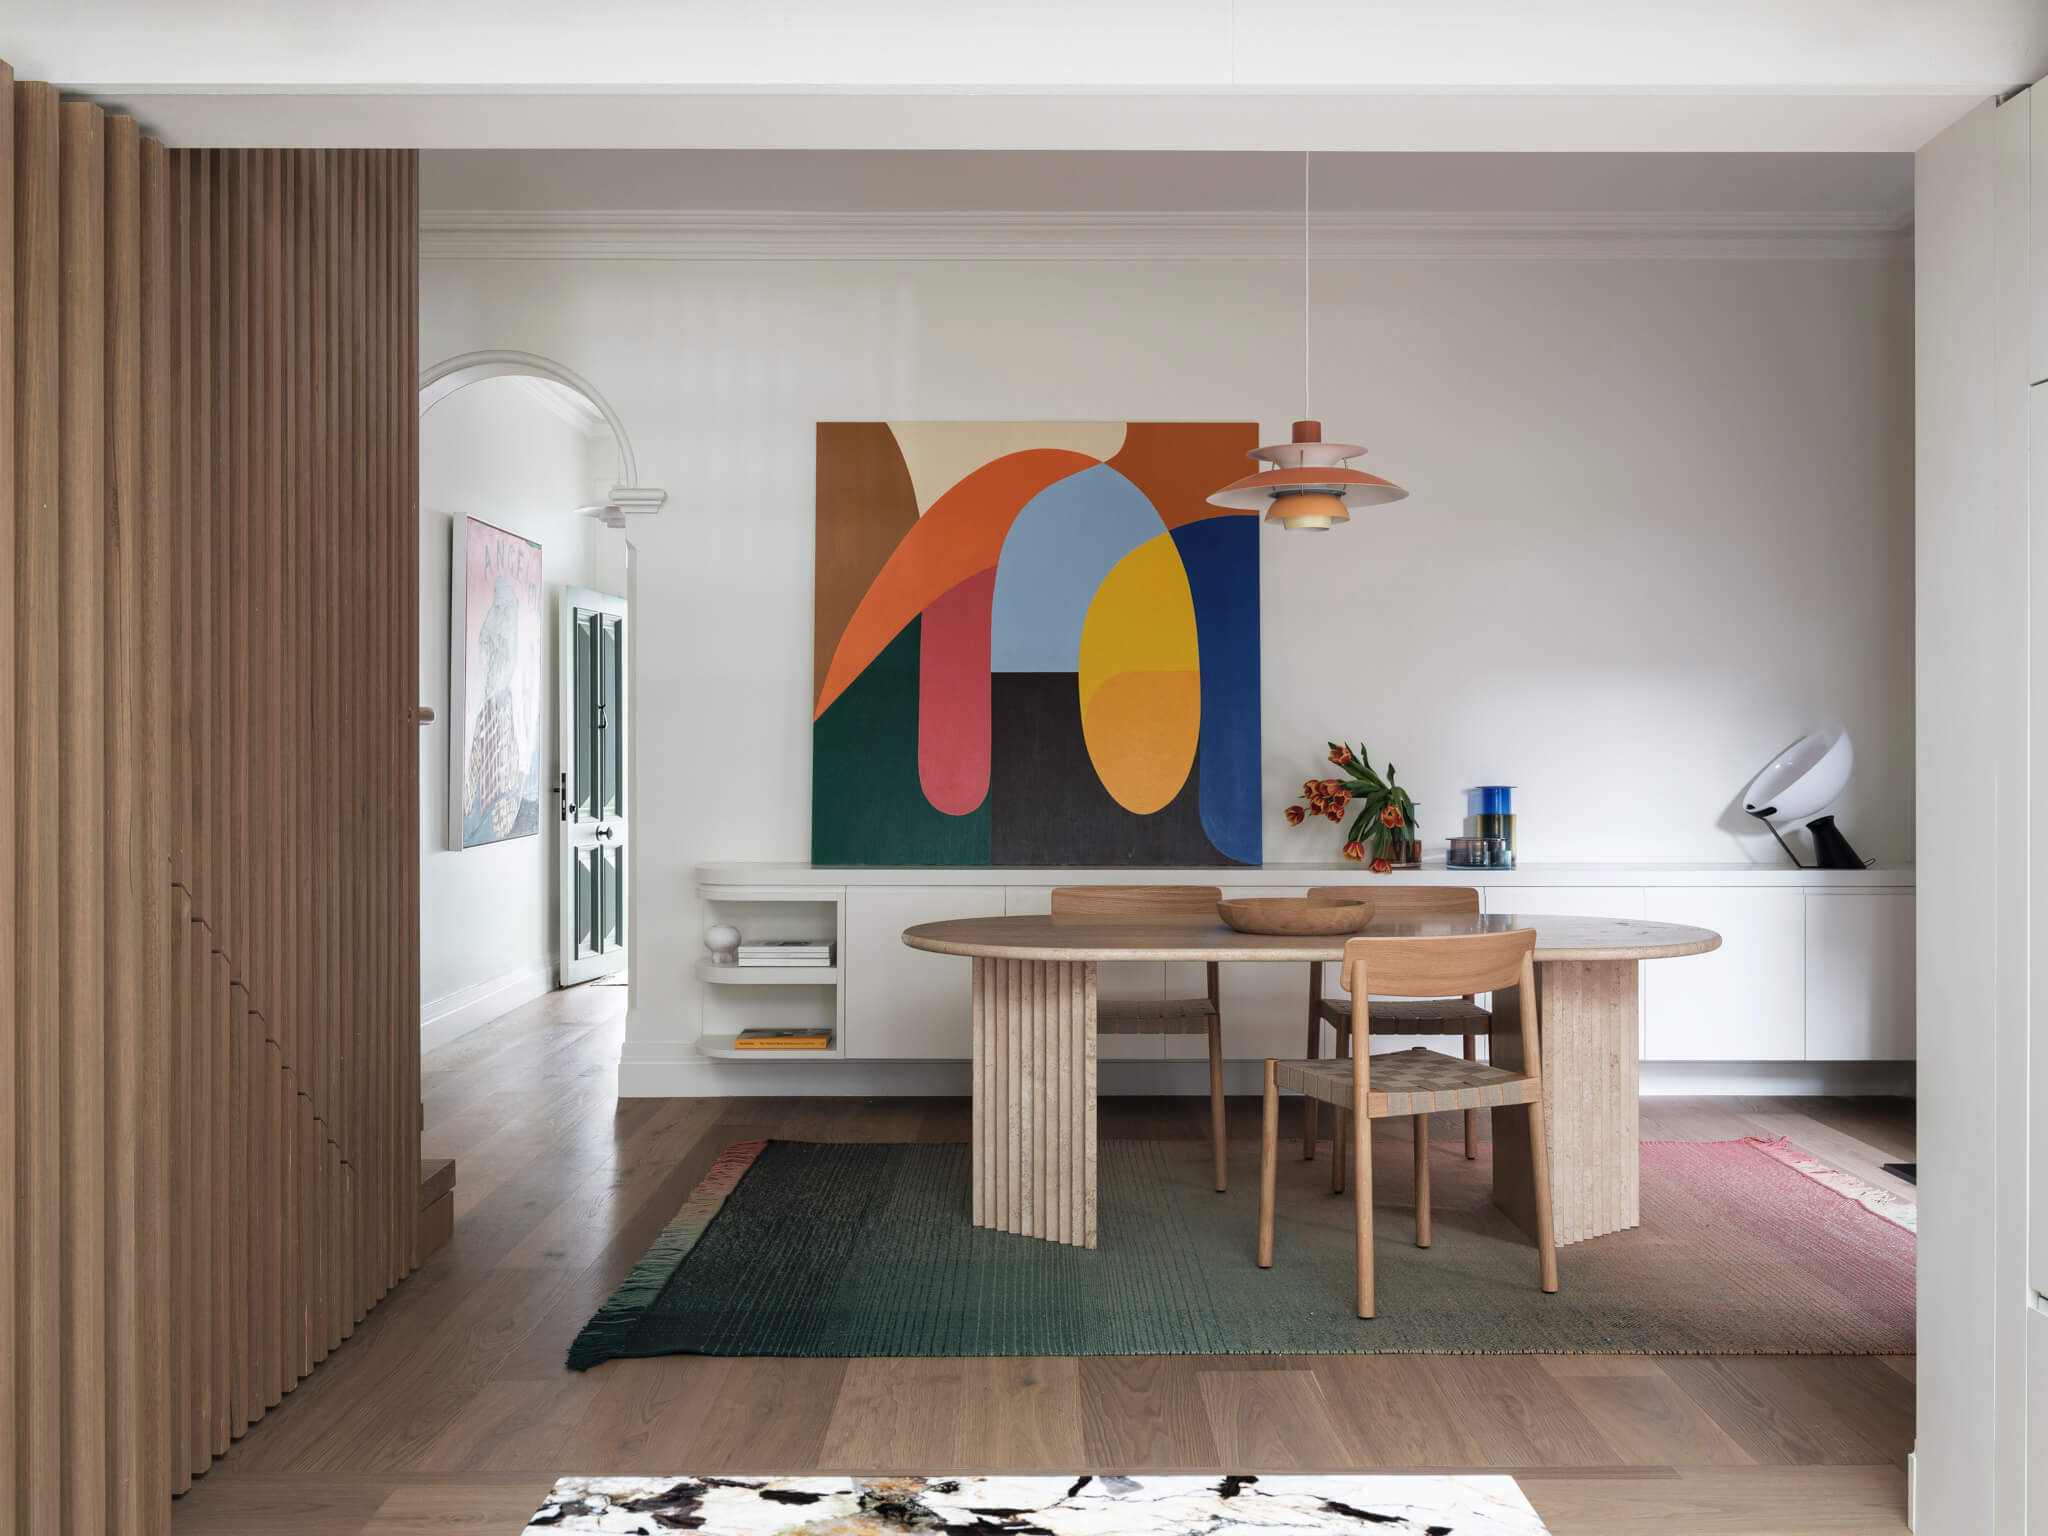 Dining area in the Leichhardt House,The walls are adorned with vibrant art pieces by Stephen Ormandy, in built buffet in White, slatted panel in timber, light Louis Poulsen by Cult design, and Timber Floor by Tongue n Groove Australia.